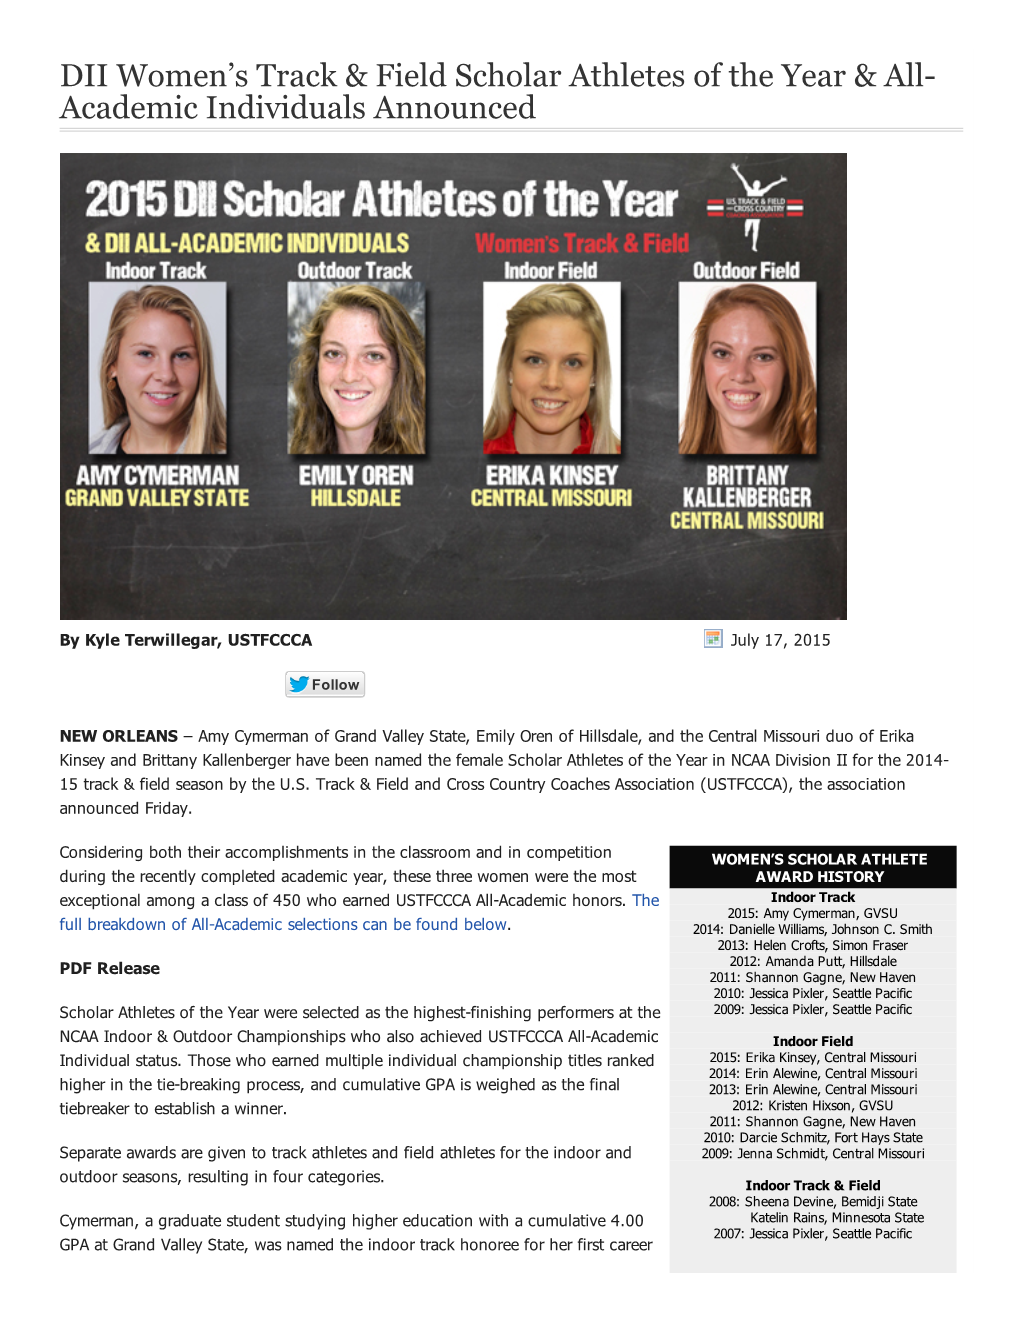 DII Women's Track & Field Scholar Athletes of the Year & All Academic